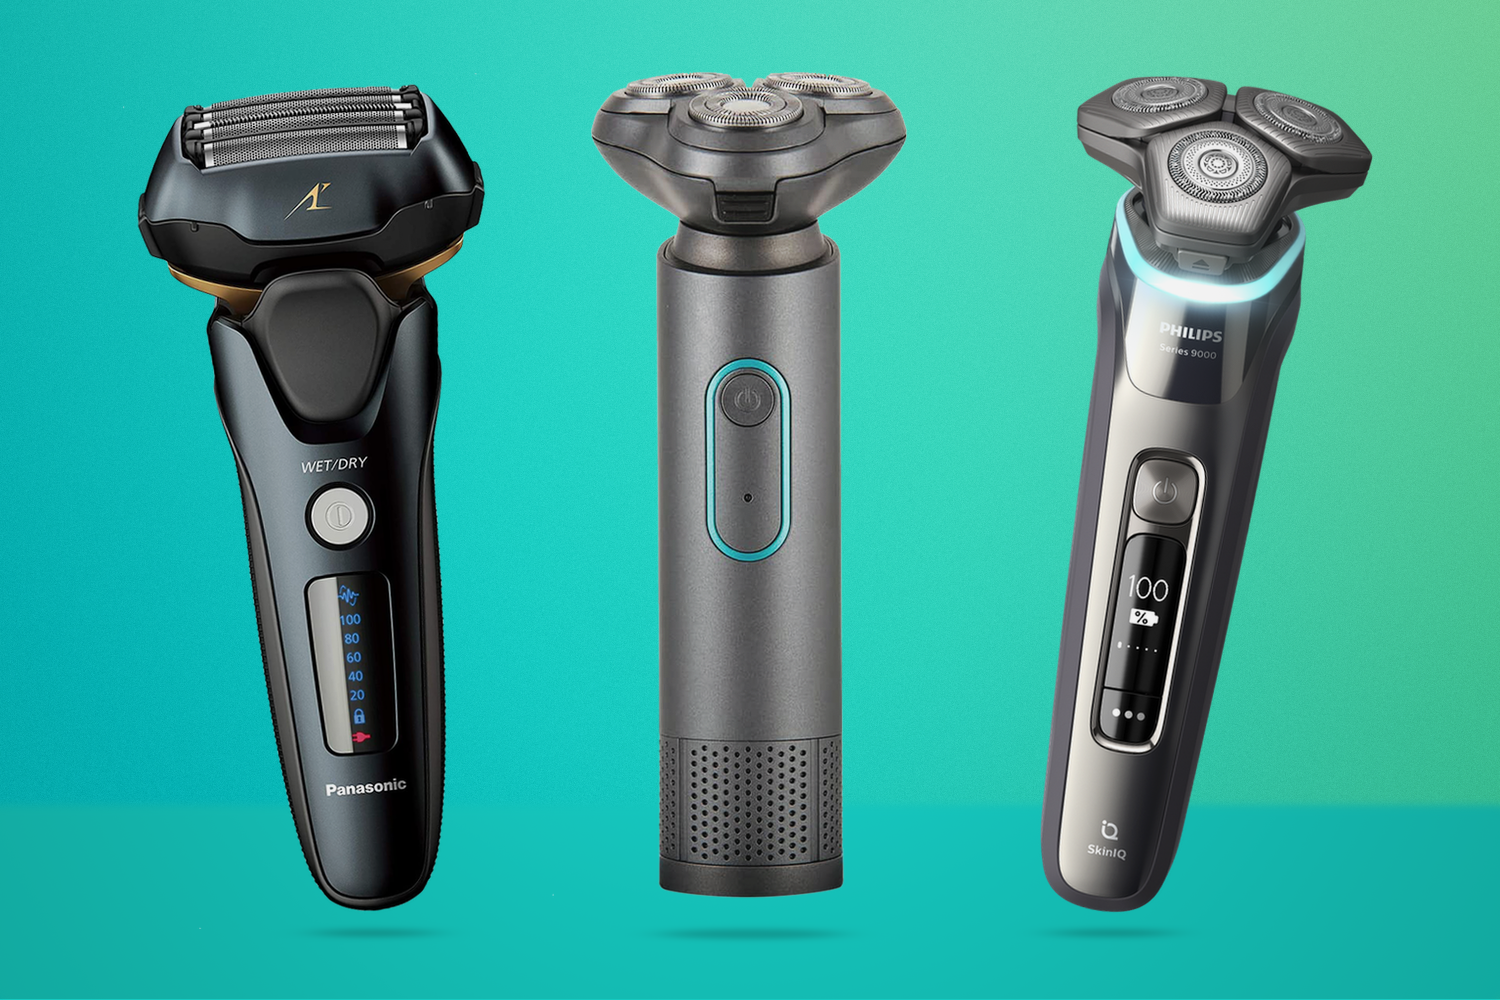 Braun Series 9 Electric Shaver 9477cc, 4+1 ProHead with ProLift Precision  Trimmer, For Wet & Dry Use with Charging PowerCase - Beste